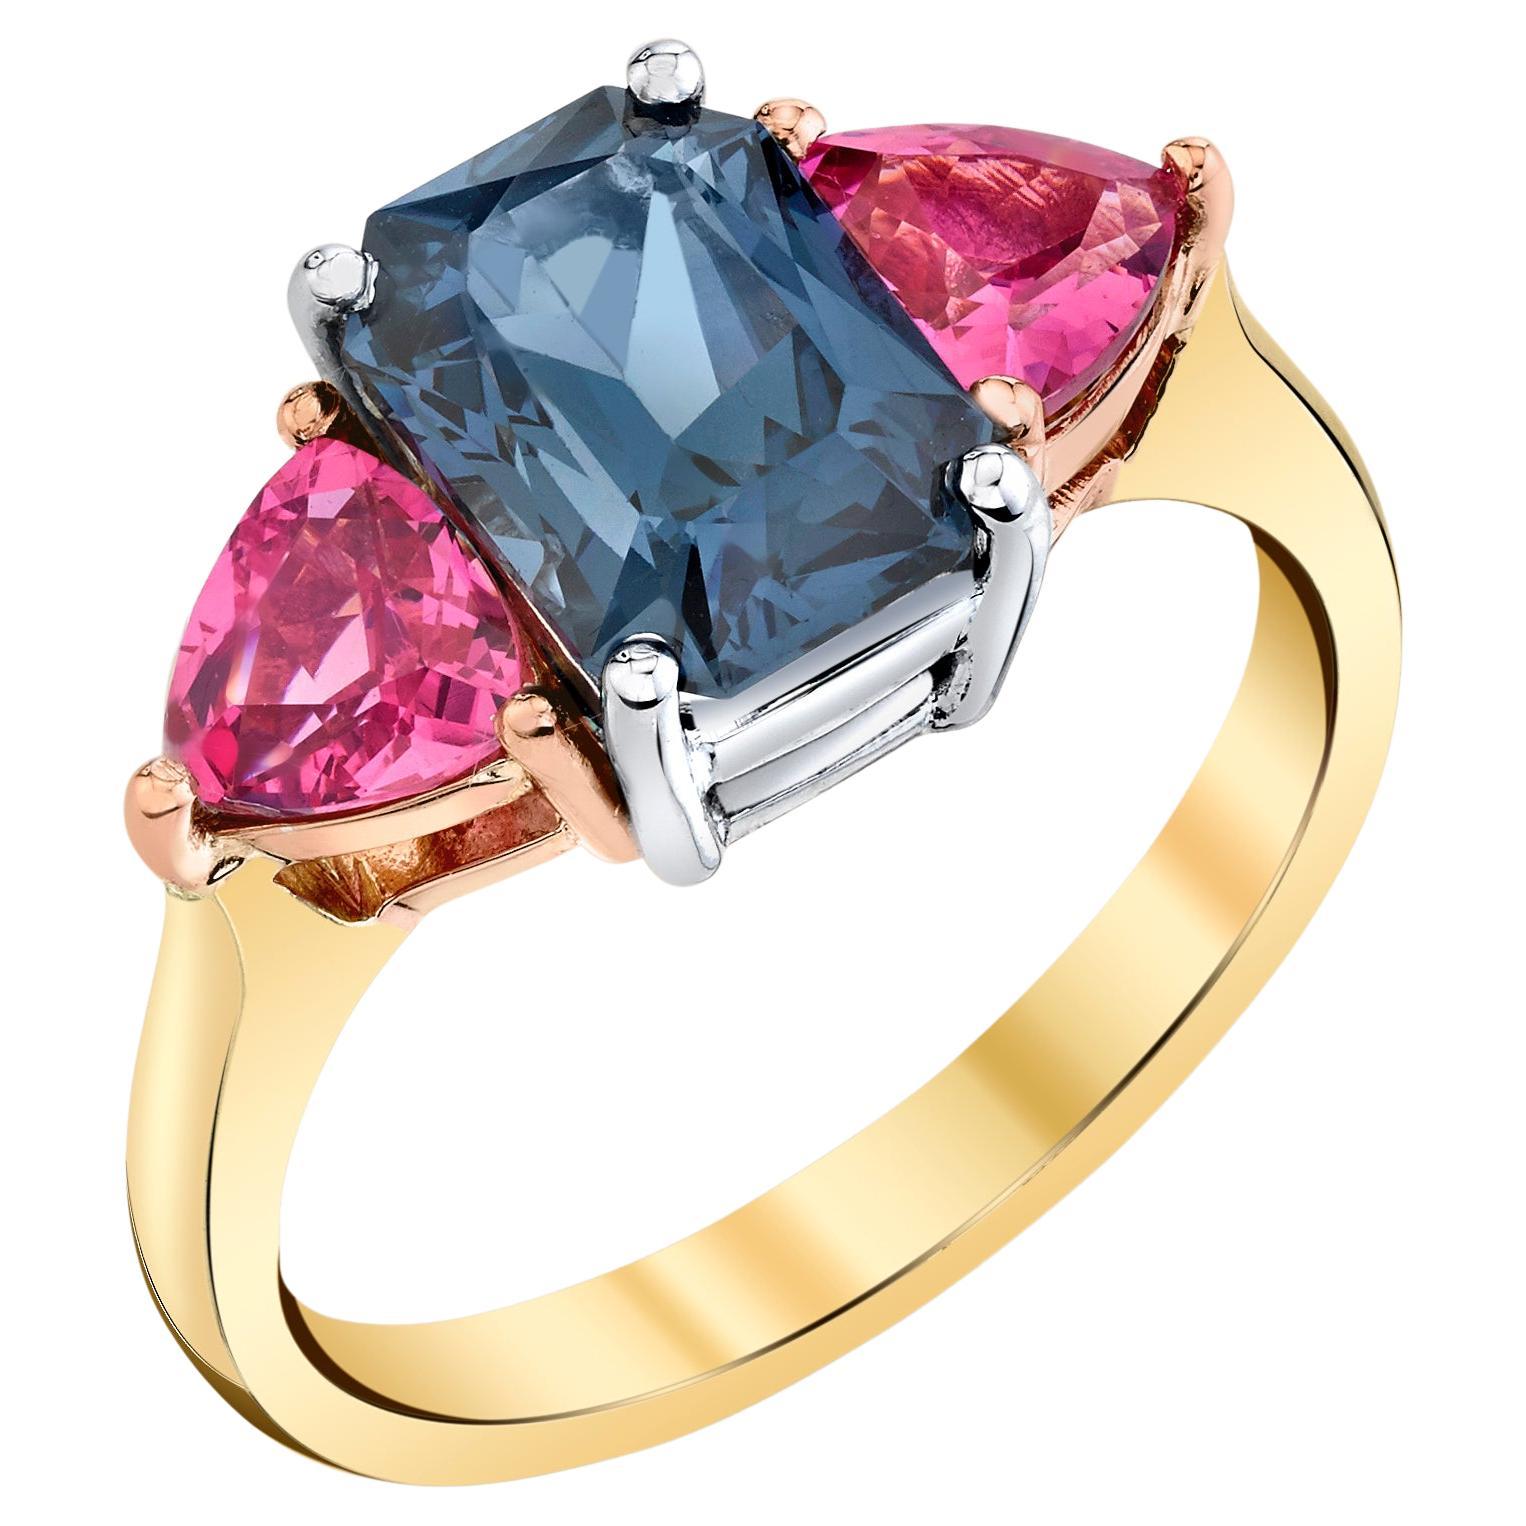 Lavender and Pink Mahenge Spinel Engagement Ring in White and Yellow Gold For Sale